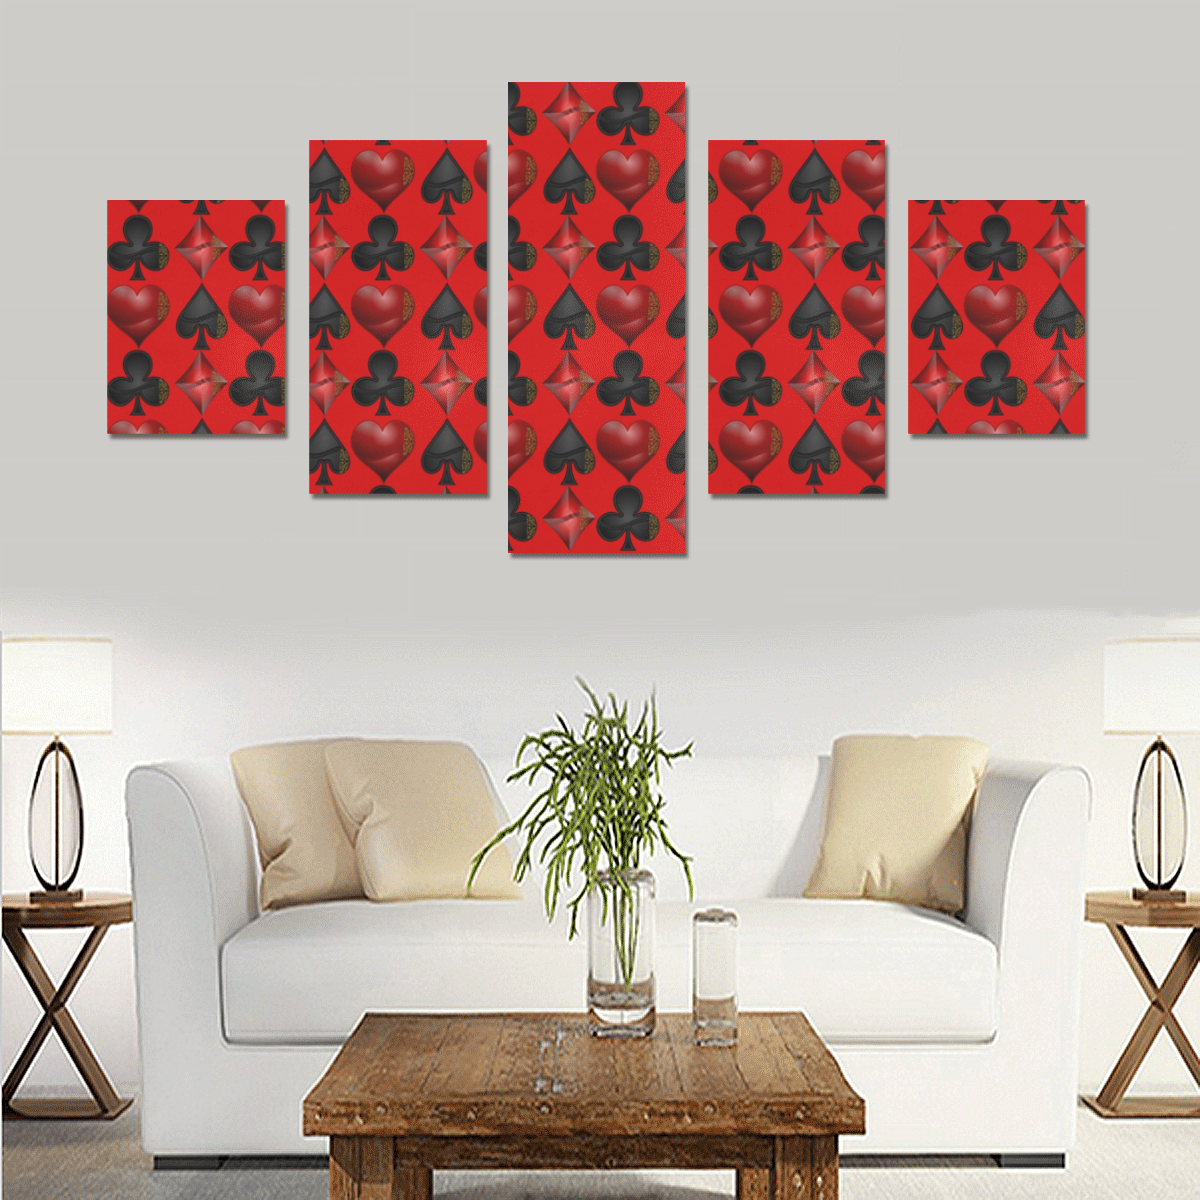 Las Vegas Black and Red Casino Poker Card Shapes on Red Canvas Print Sets B (No Frame)